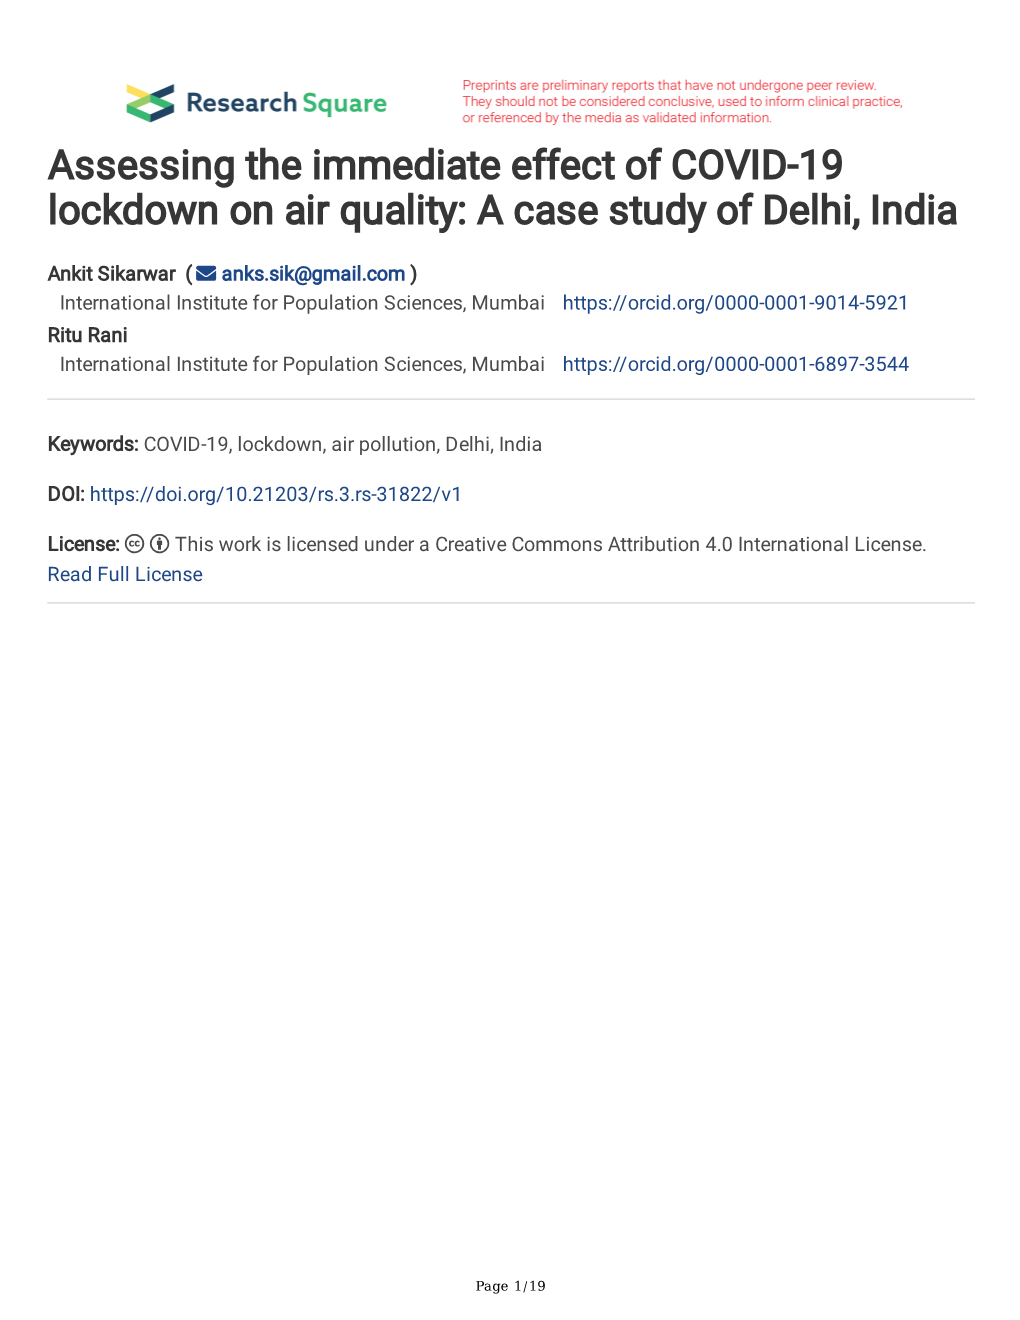 Assessing the Immediate Effect of COVID-19 Lockdown on Air Quality: a Case Study of Delhi, India